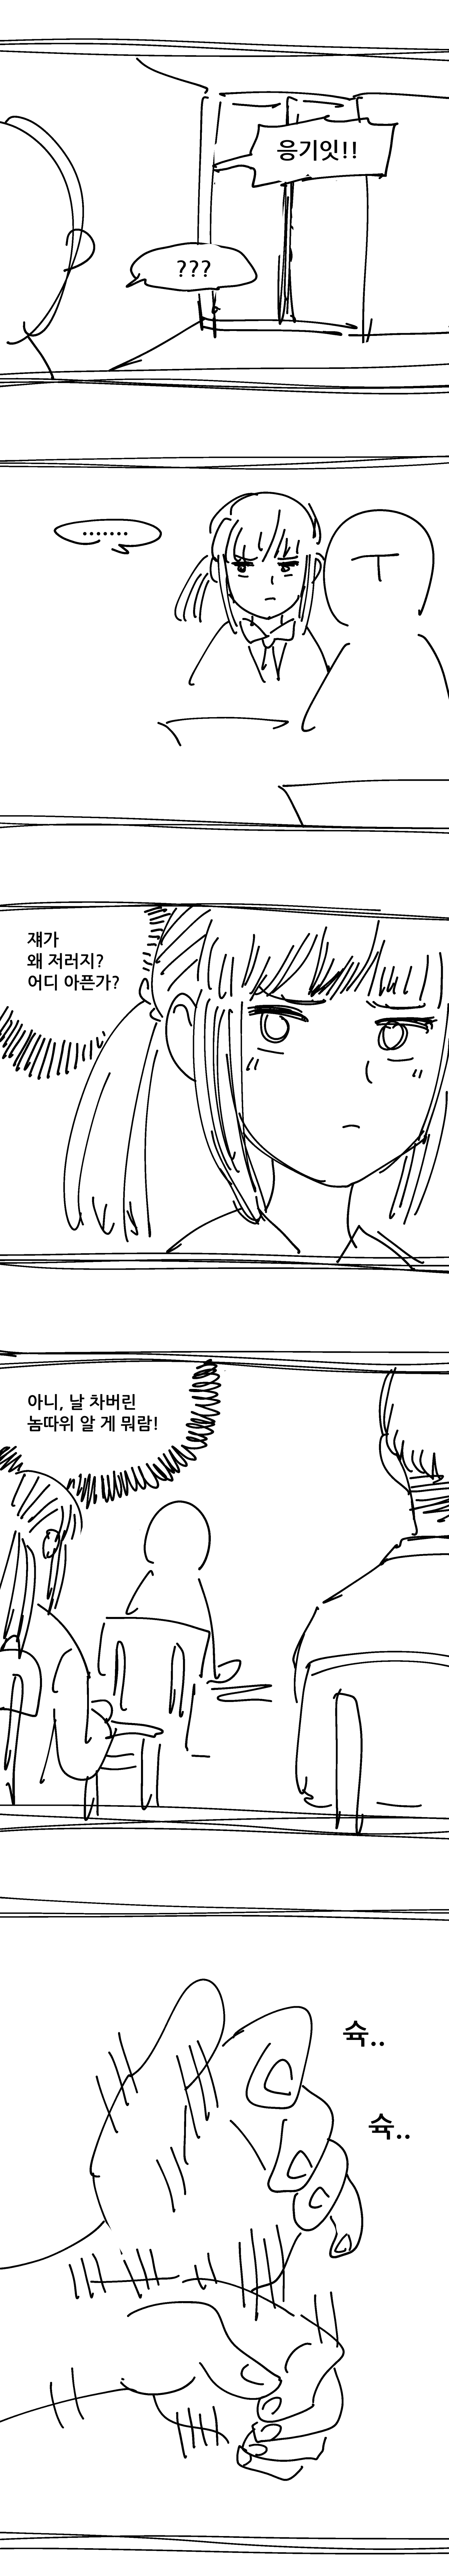 Back) Cartoon of being insulted in class by a psychic childhood friend.manhwa